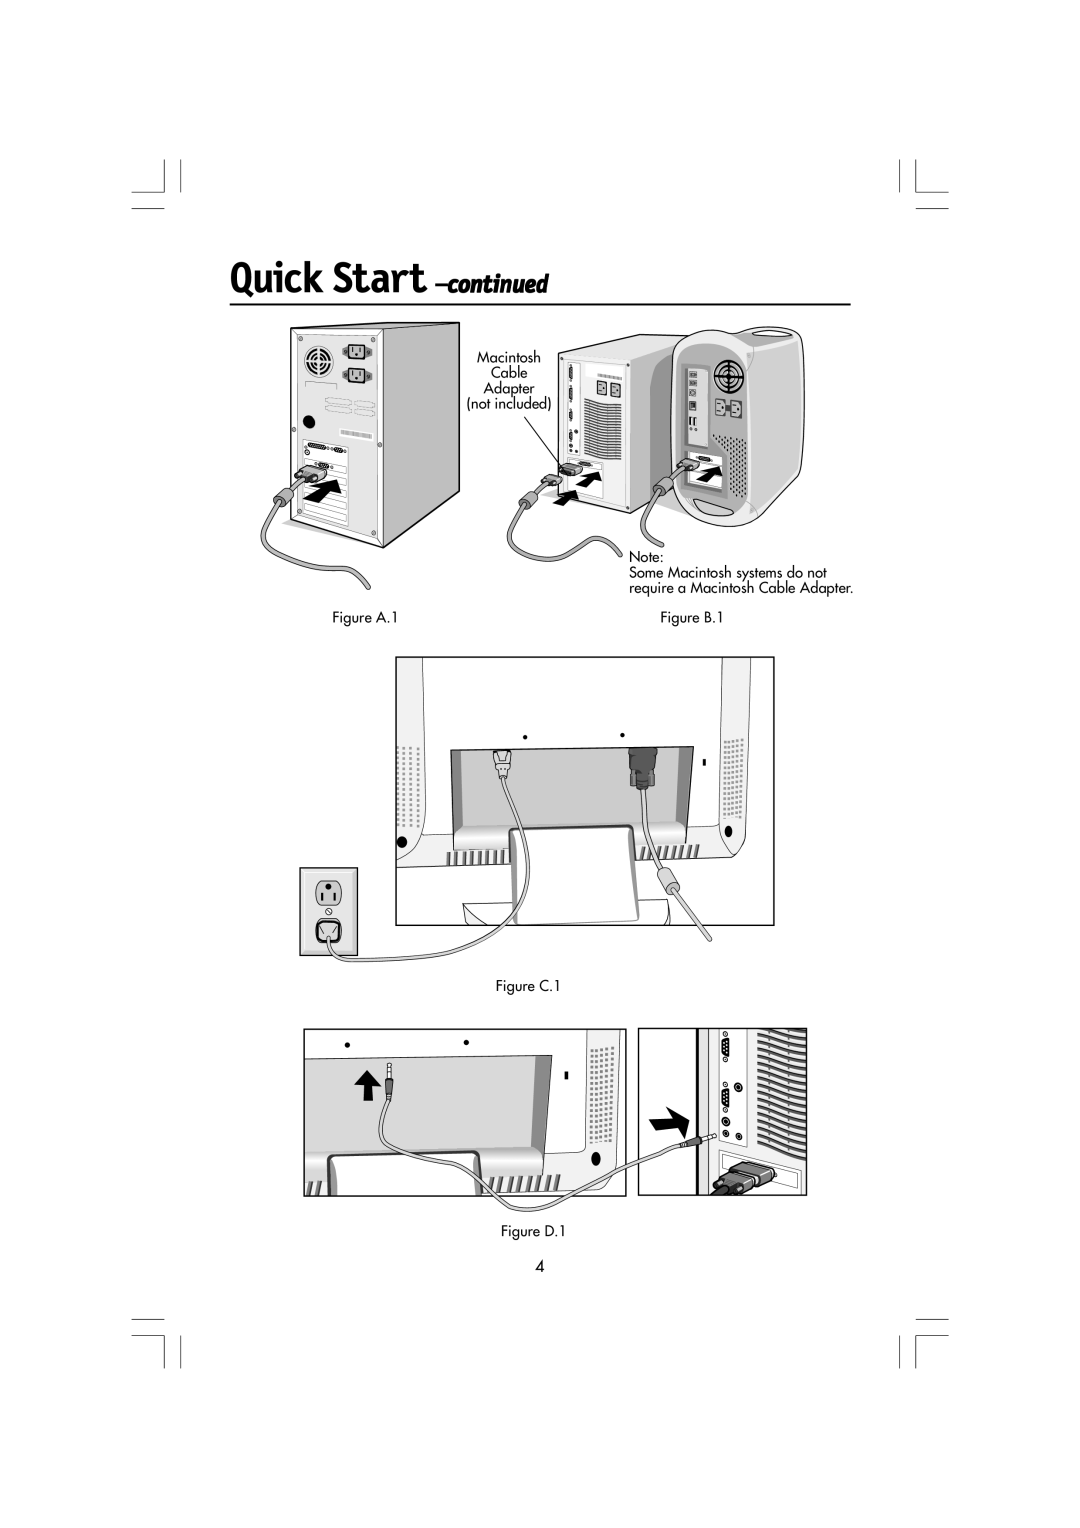 Mitsubishi Electronics LCD1720M Quick Start -continued, Some Macintosh systems do not require a Macintosh Cable Adapter 